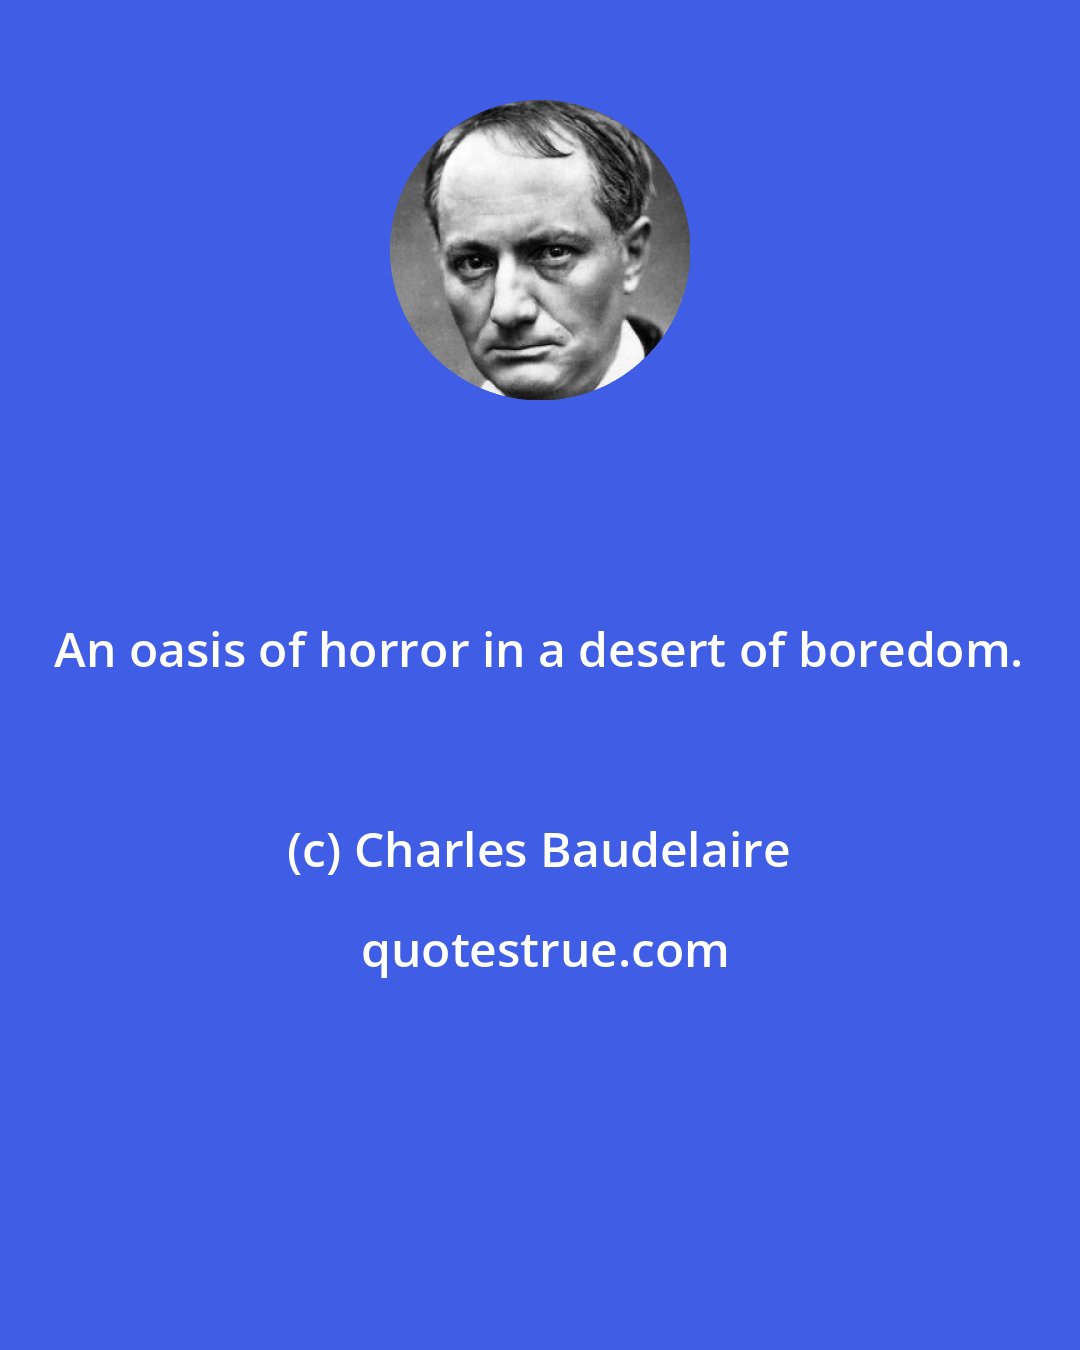 Charles Baudelaire: An oasis of horror in a desert of boredom.